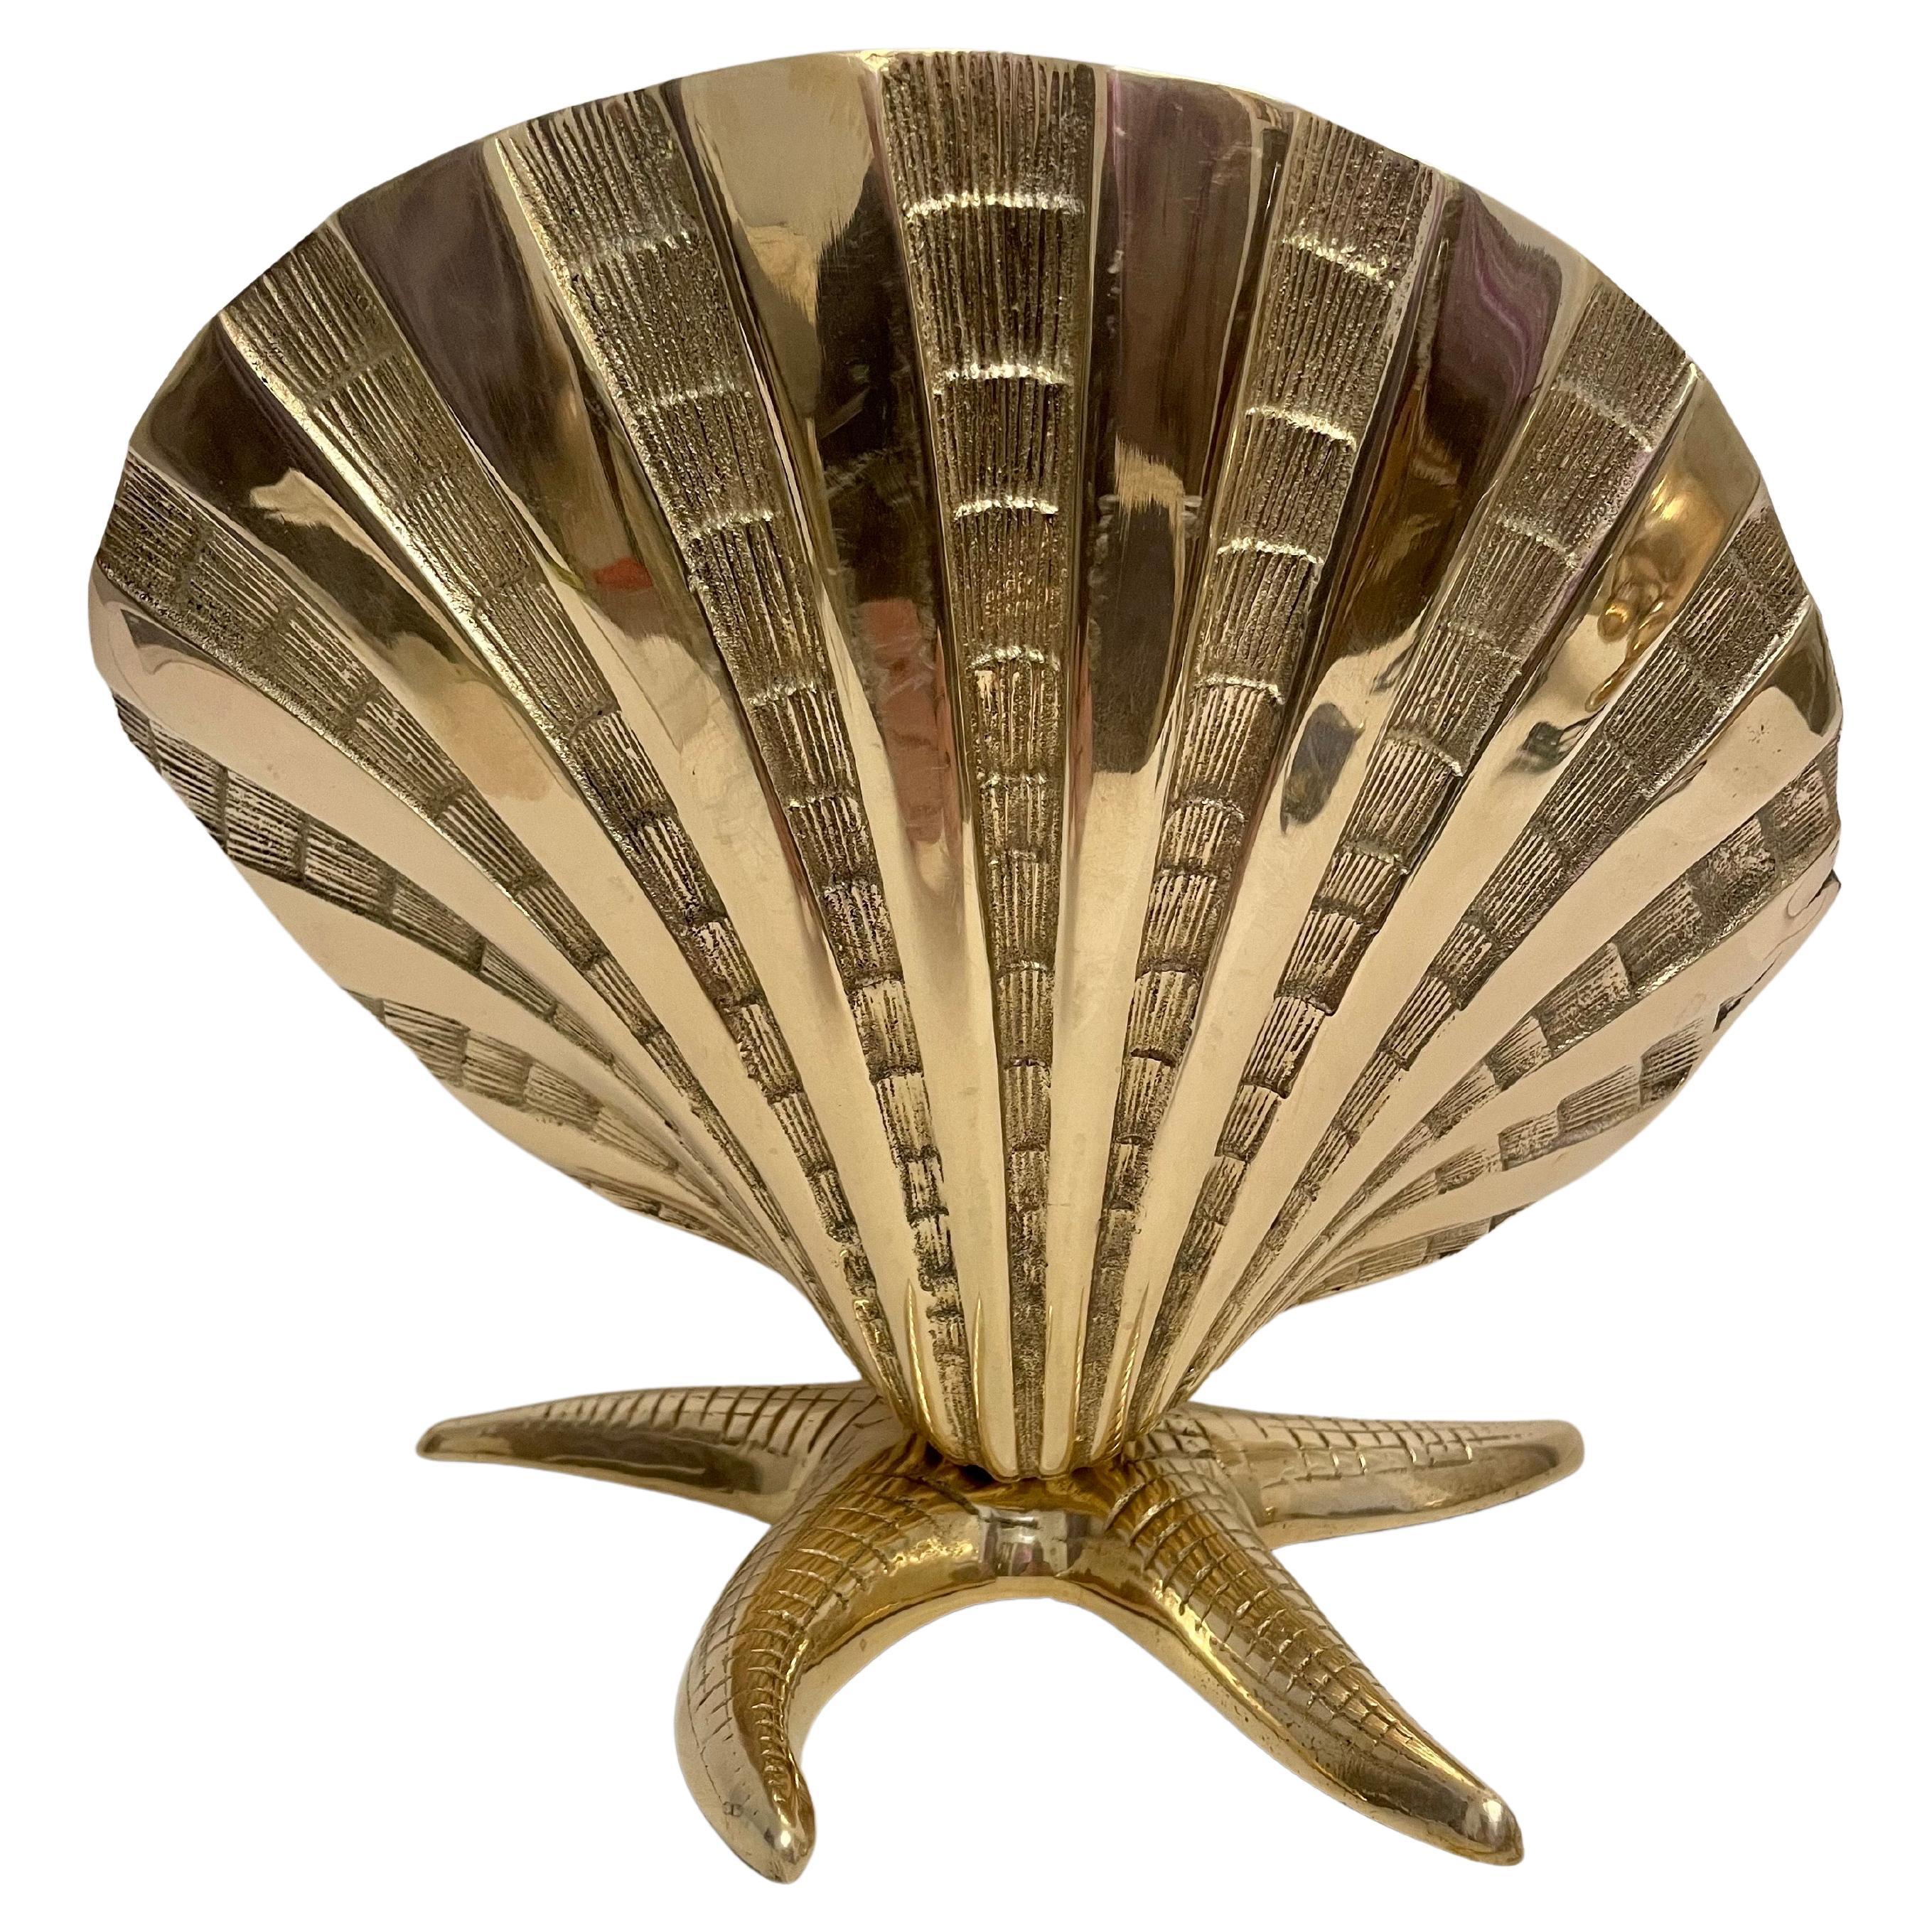 Giant Brass Nautical Clam Shell Seashell on Starfish Base Planter Sculpture For Sale